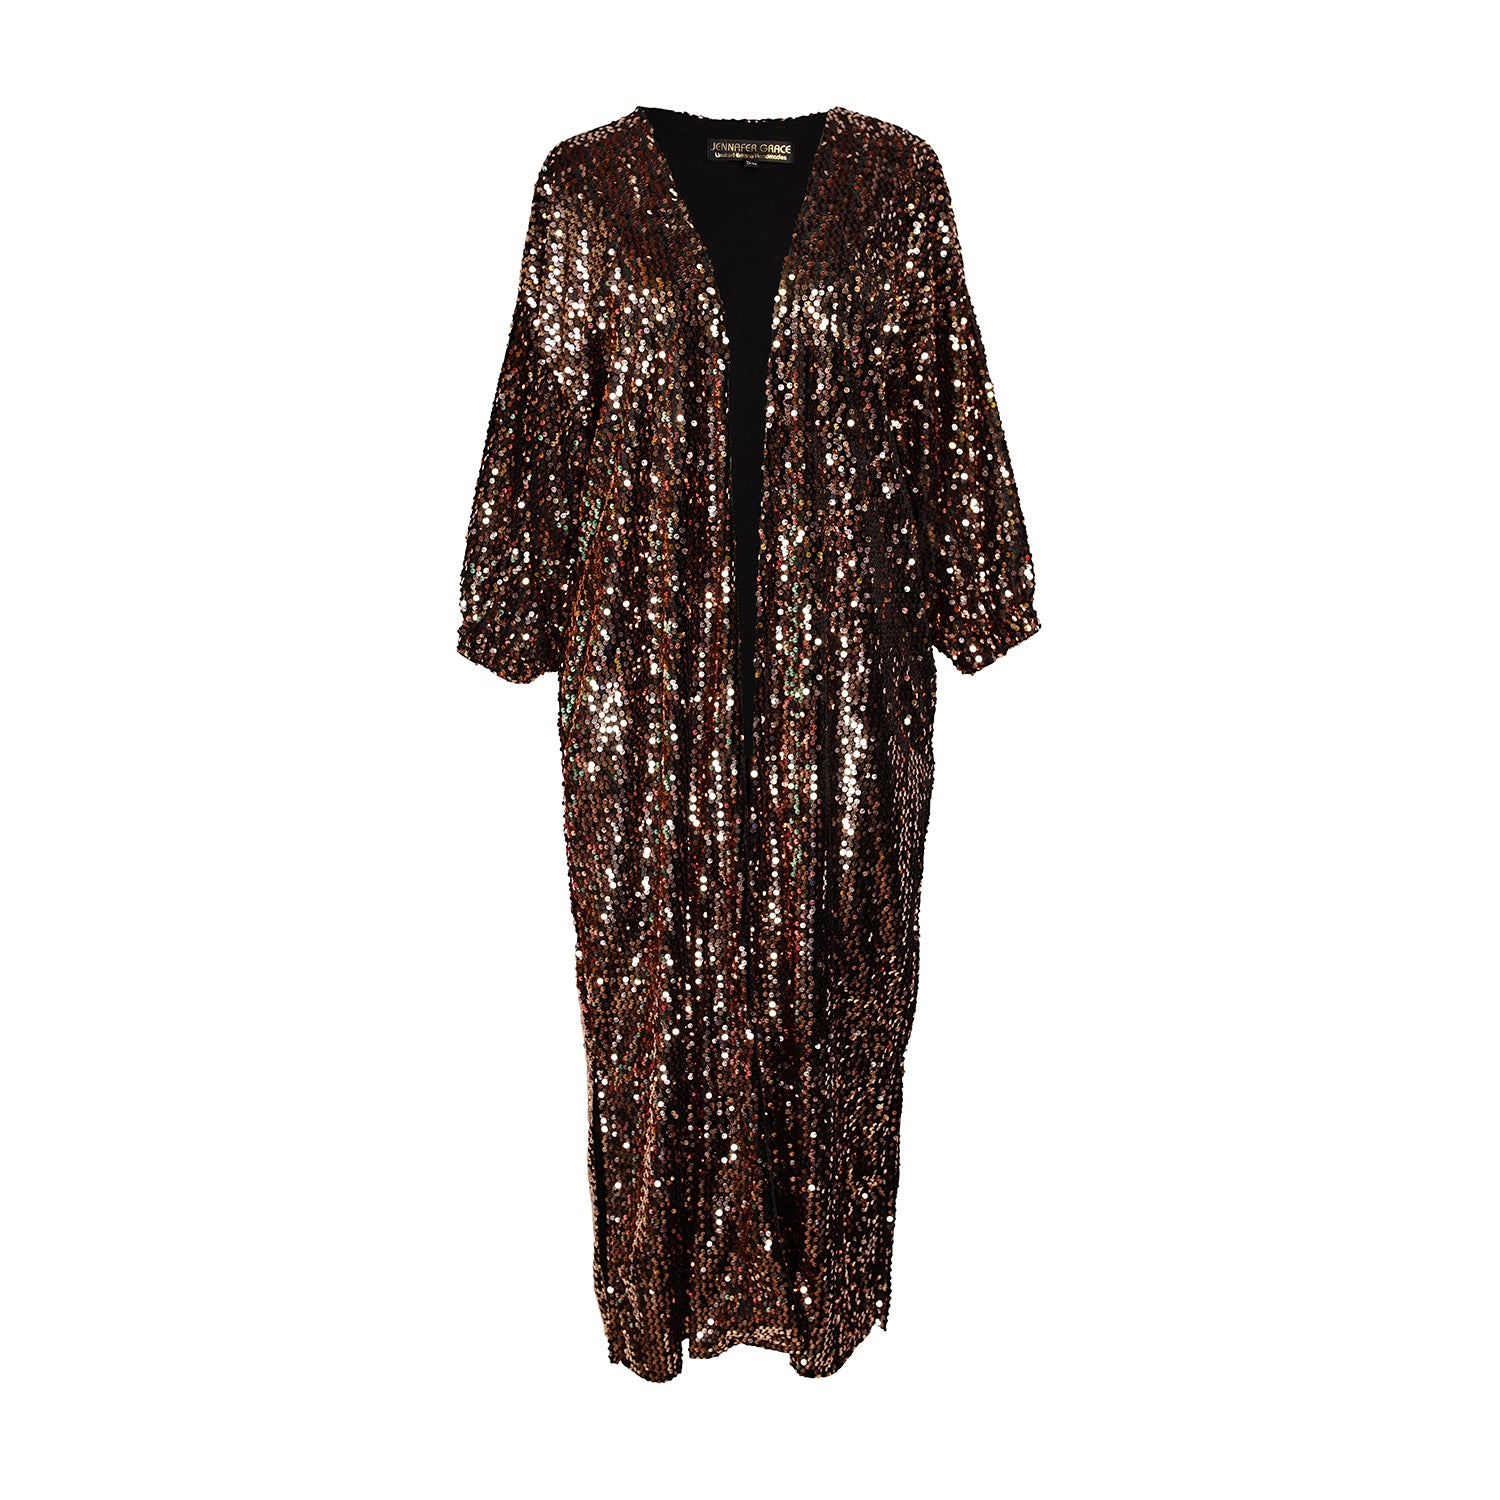 Ultra glamorous shimmering sequined cocoon jacket made from a soft black velvet inlaid with deep copper sequins and lined with soft black jersey. Featuring cocoon sleeves and pockets with a mid-shin hem.